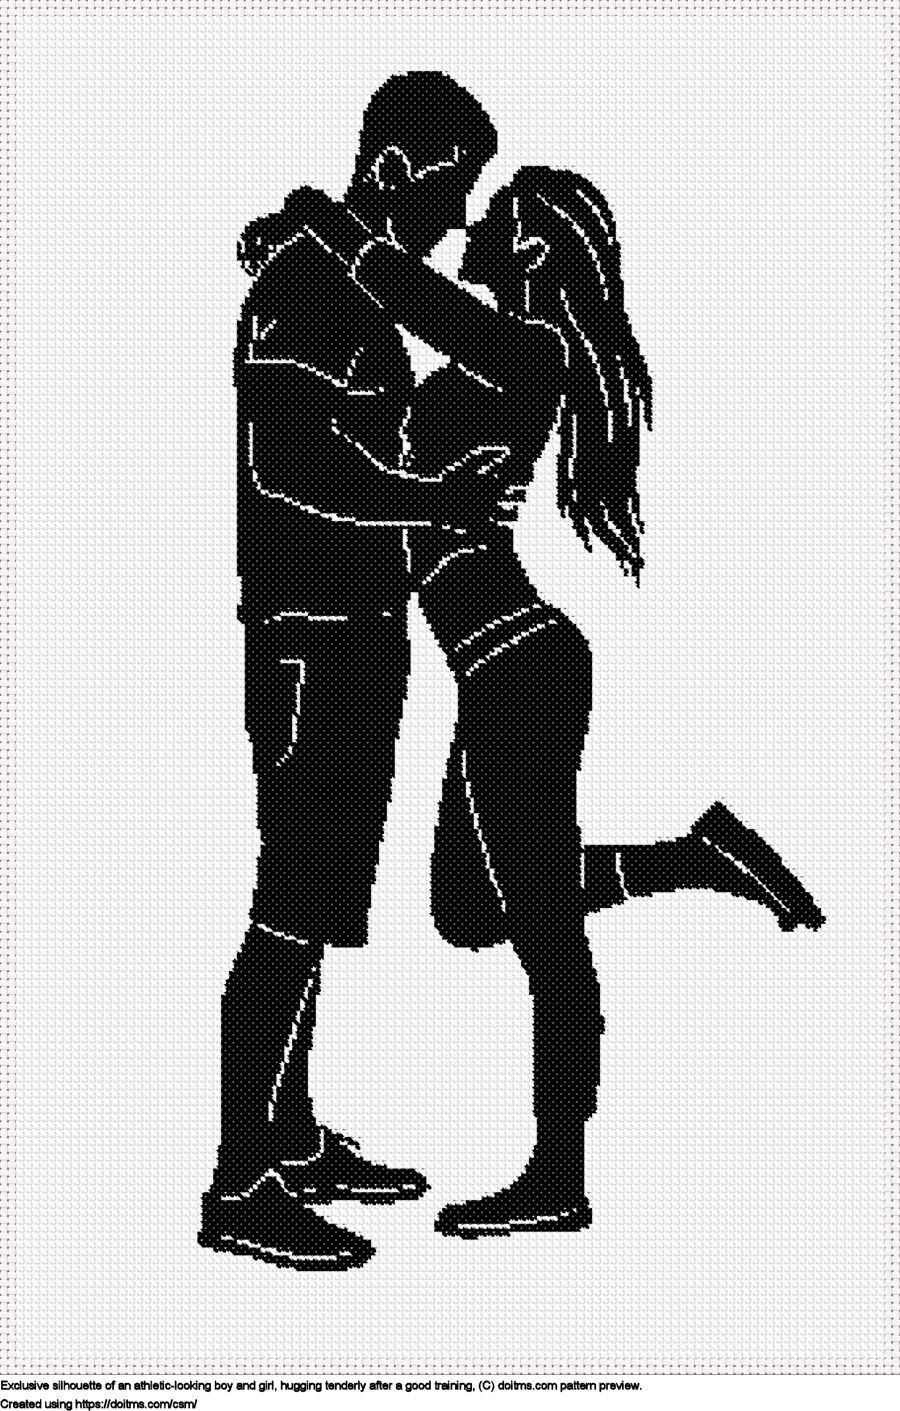 Free Hugging athletic couple silhouette cross-stitching design